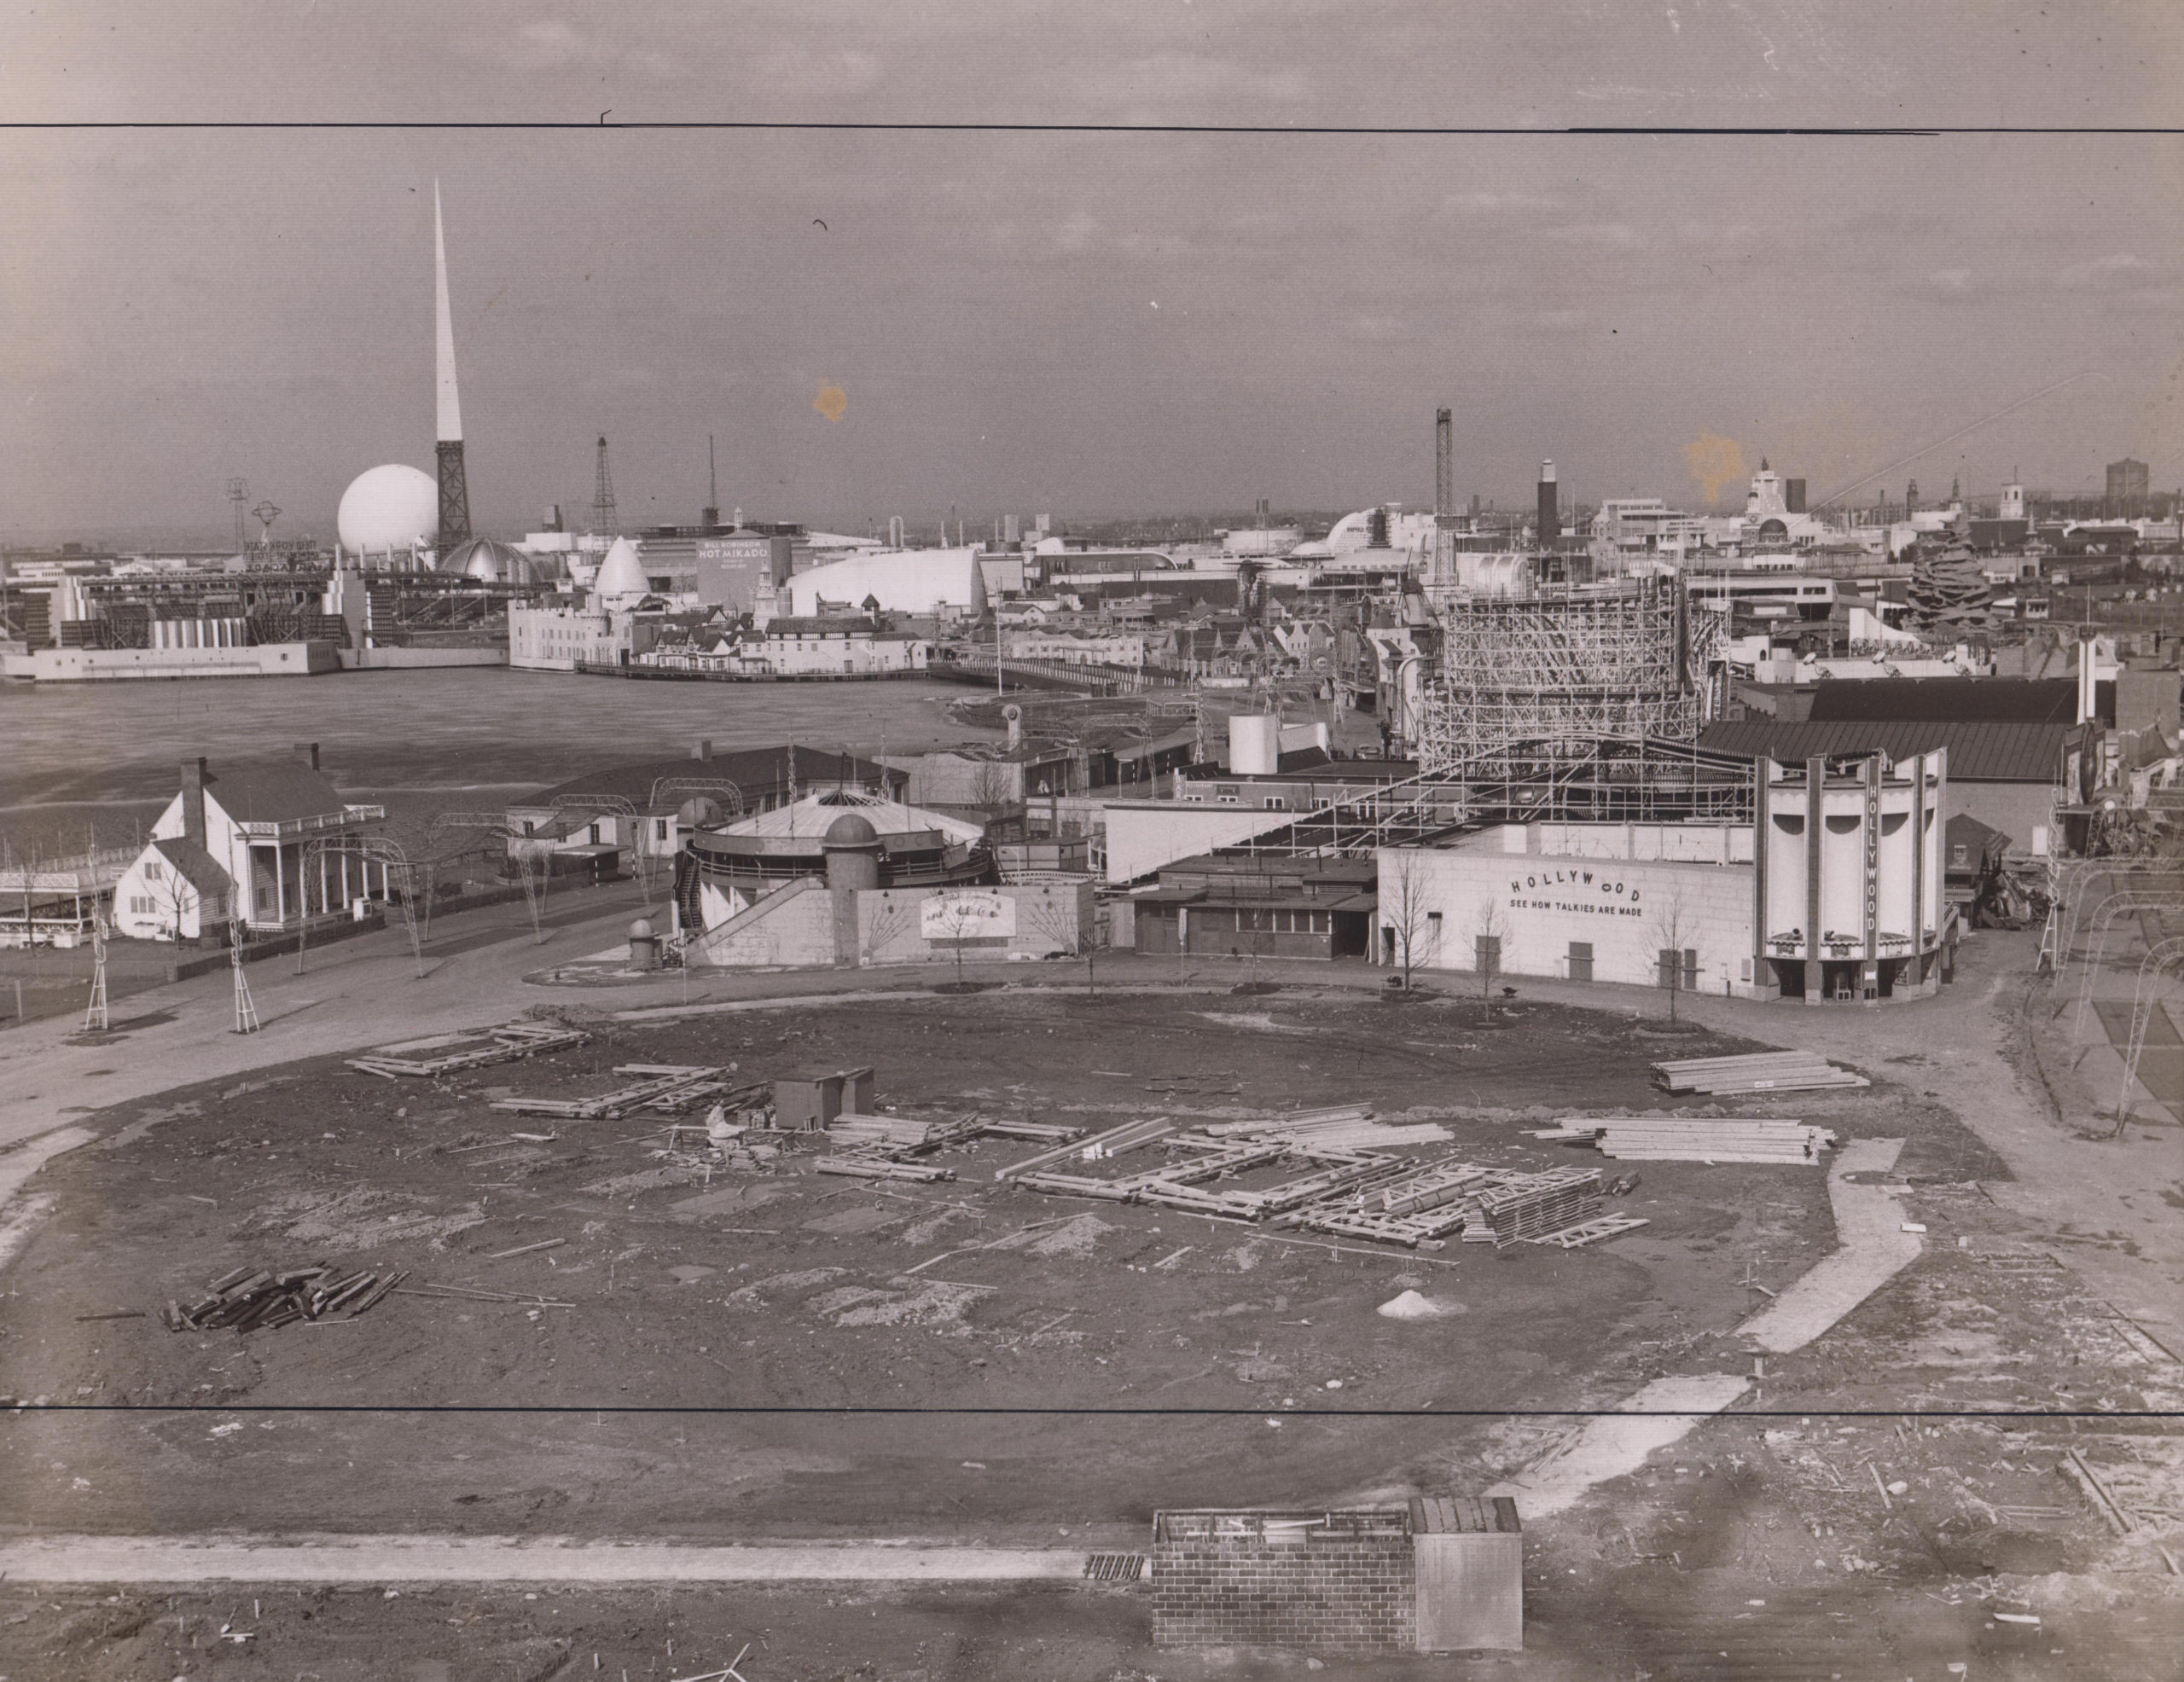 A black and white photo of an open piece of flat land. Sitting on the top of the land is a row of building material stacked in the center. Behind that, is a configuration of buildings of different types. The nearest building has a sign on the side that reads “HOLLYWOOD, SEE HOW TALKIES ARE MADE”.